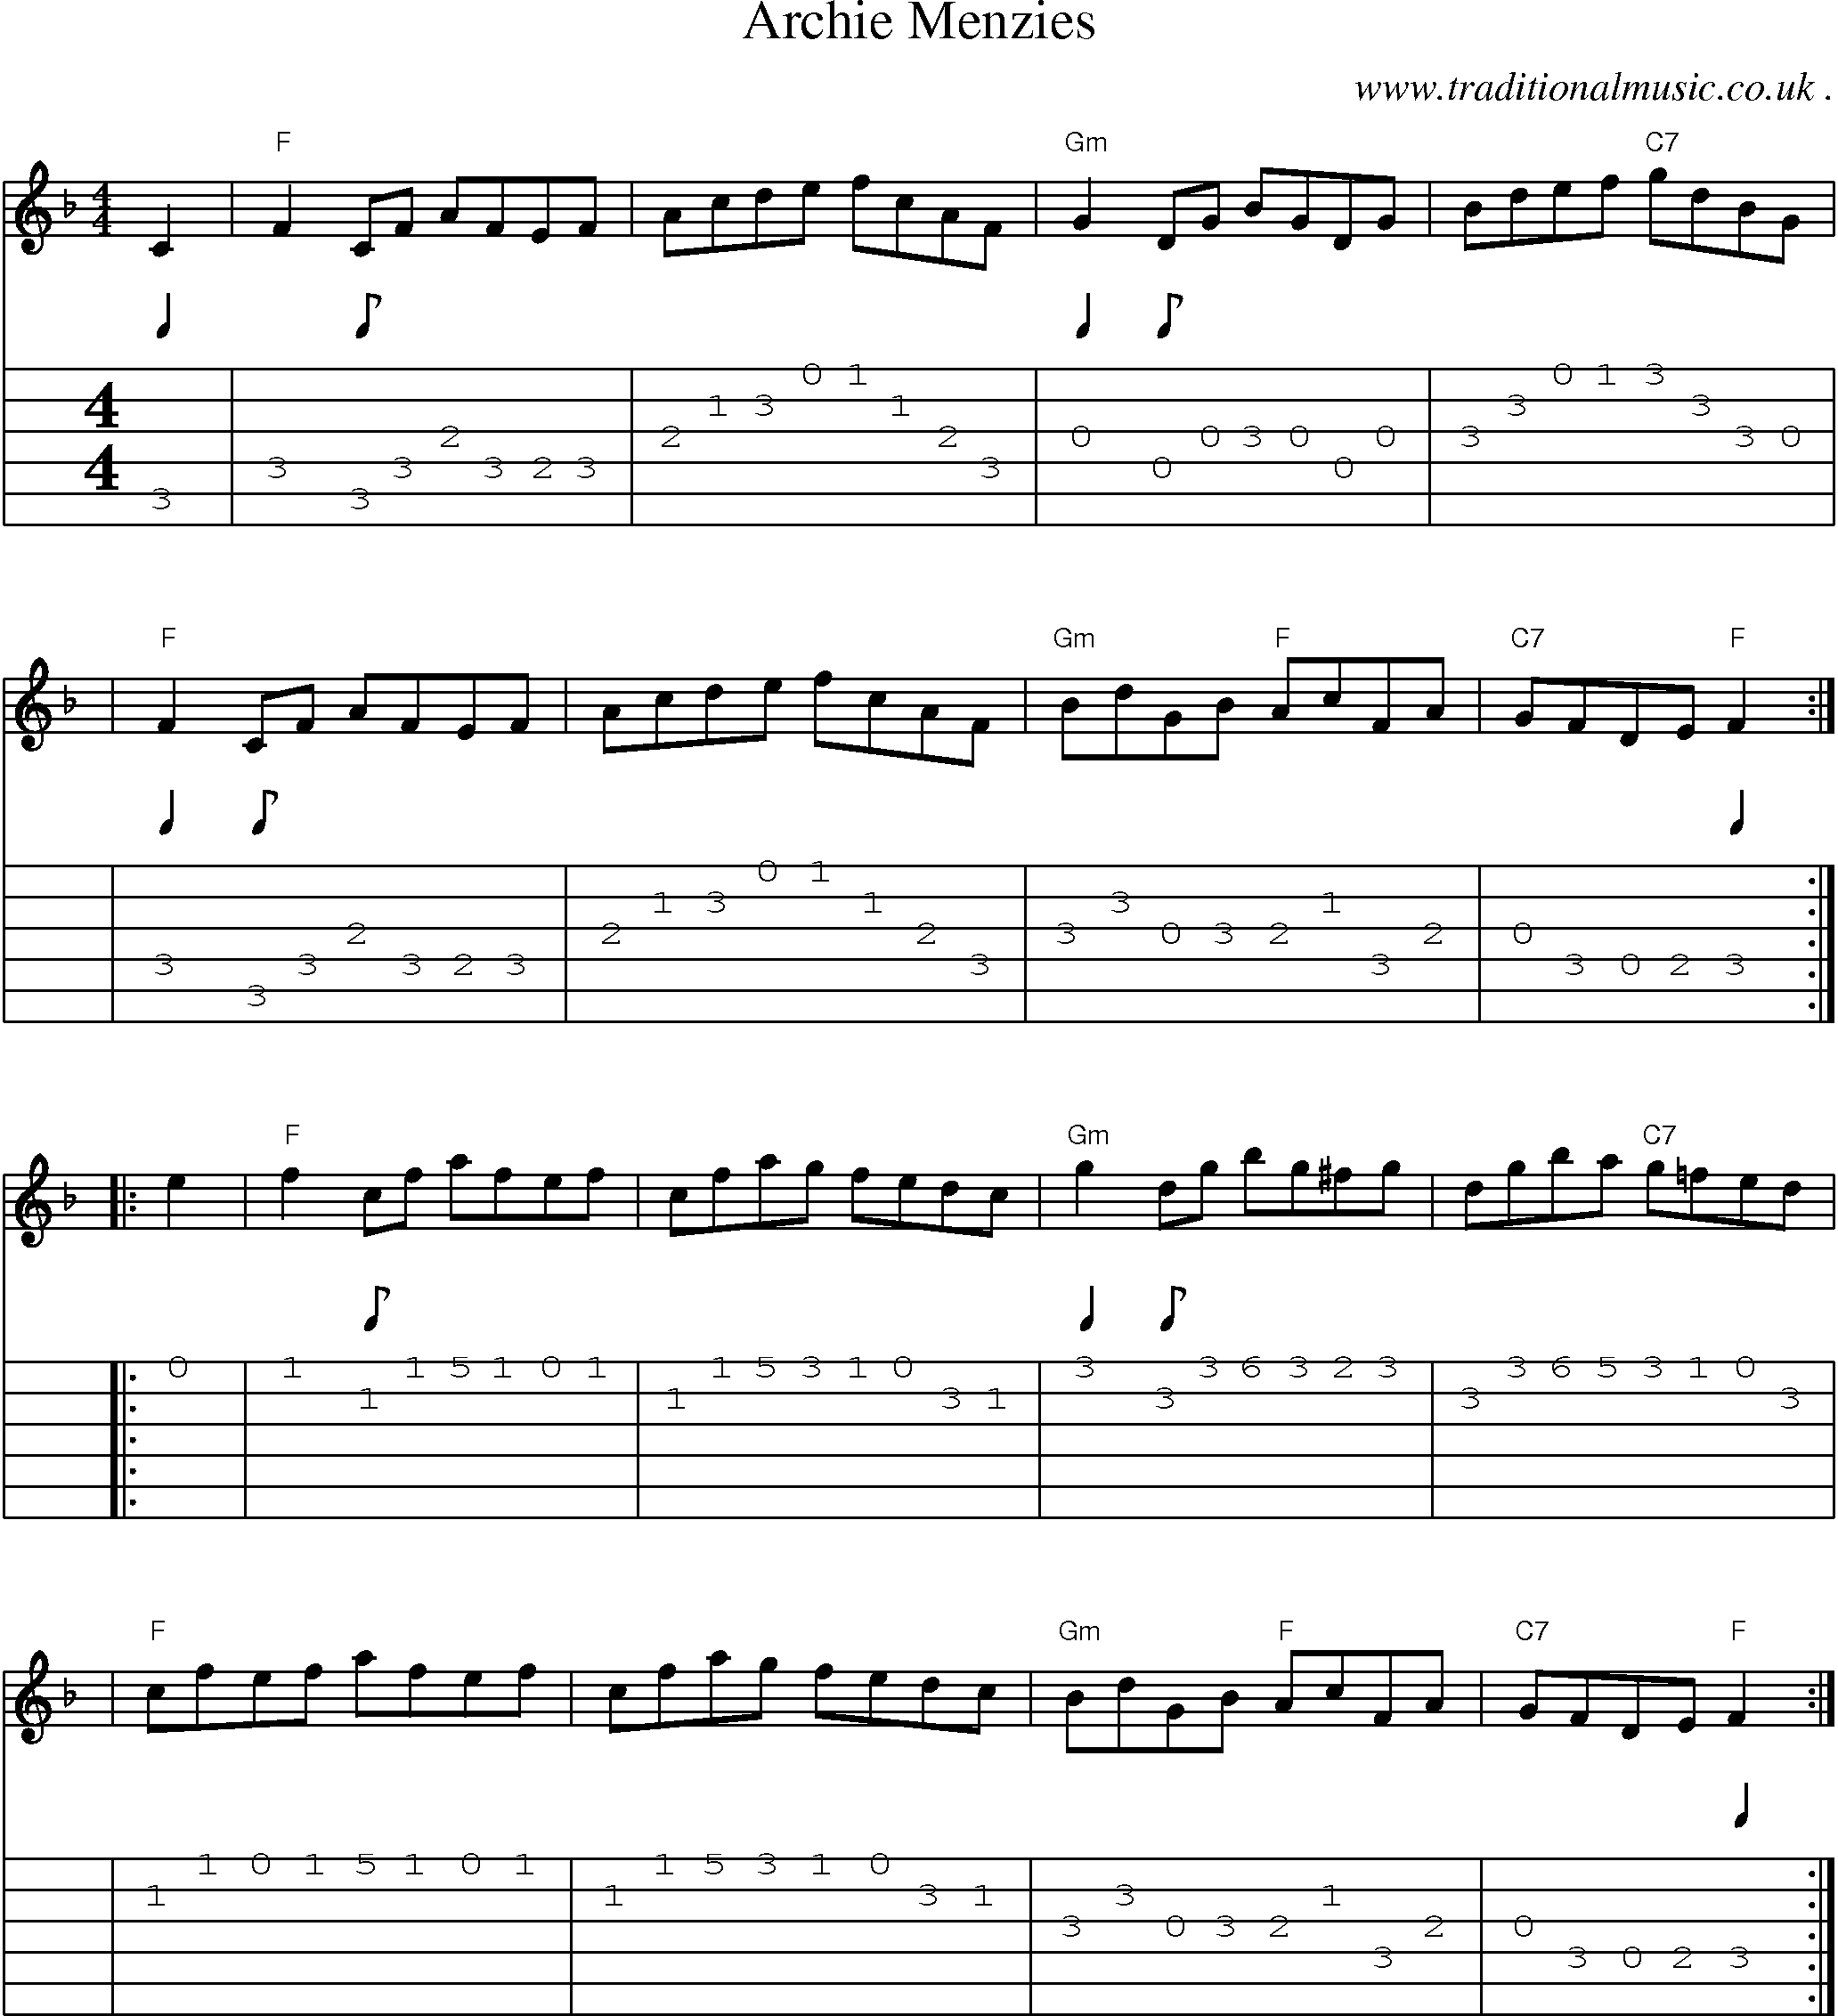 Sheet-music  score, Chords and Guitar Tabs for Archie Menzies